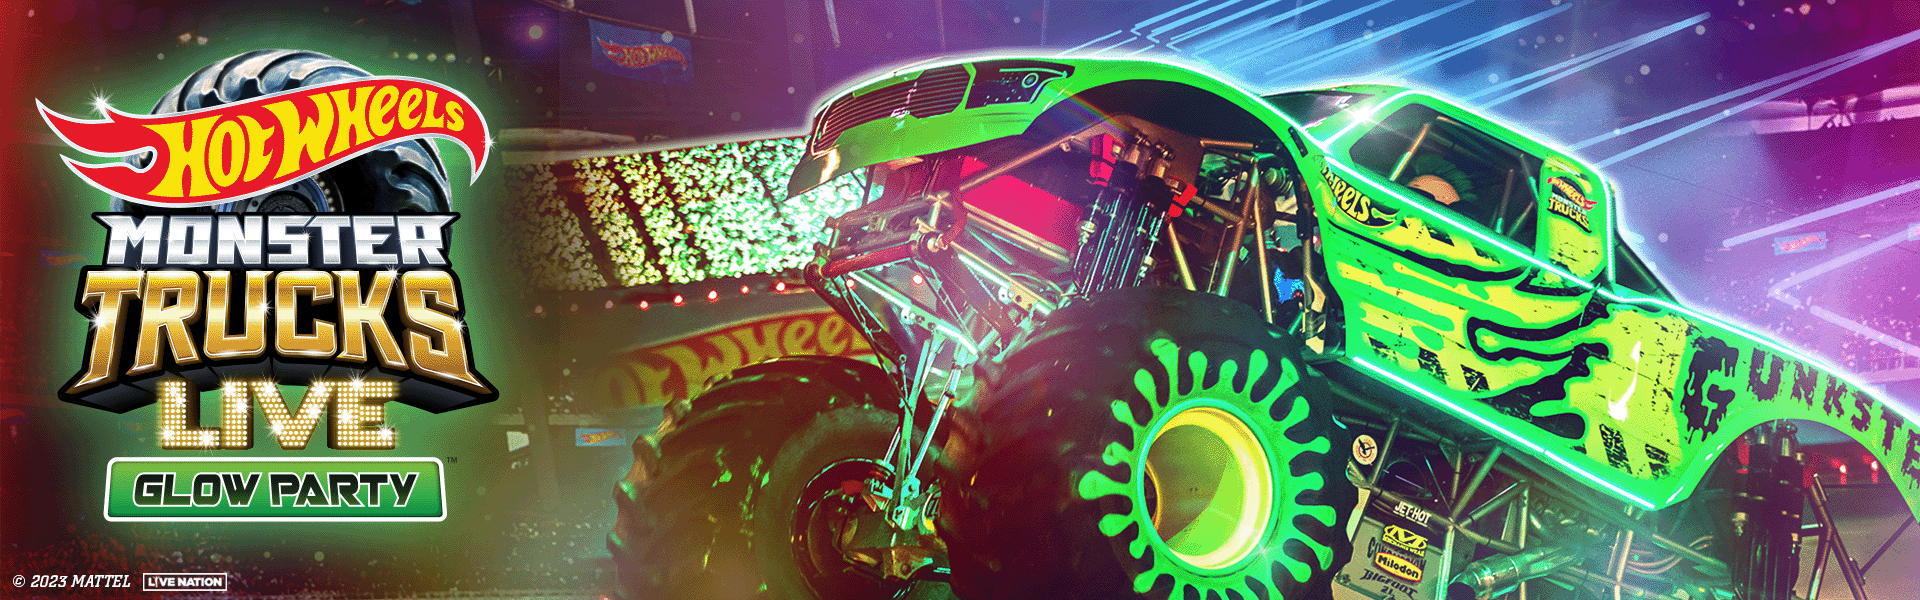 Hot Wheels Monster Trucks Live Glow Party Royal Arena